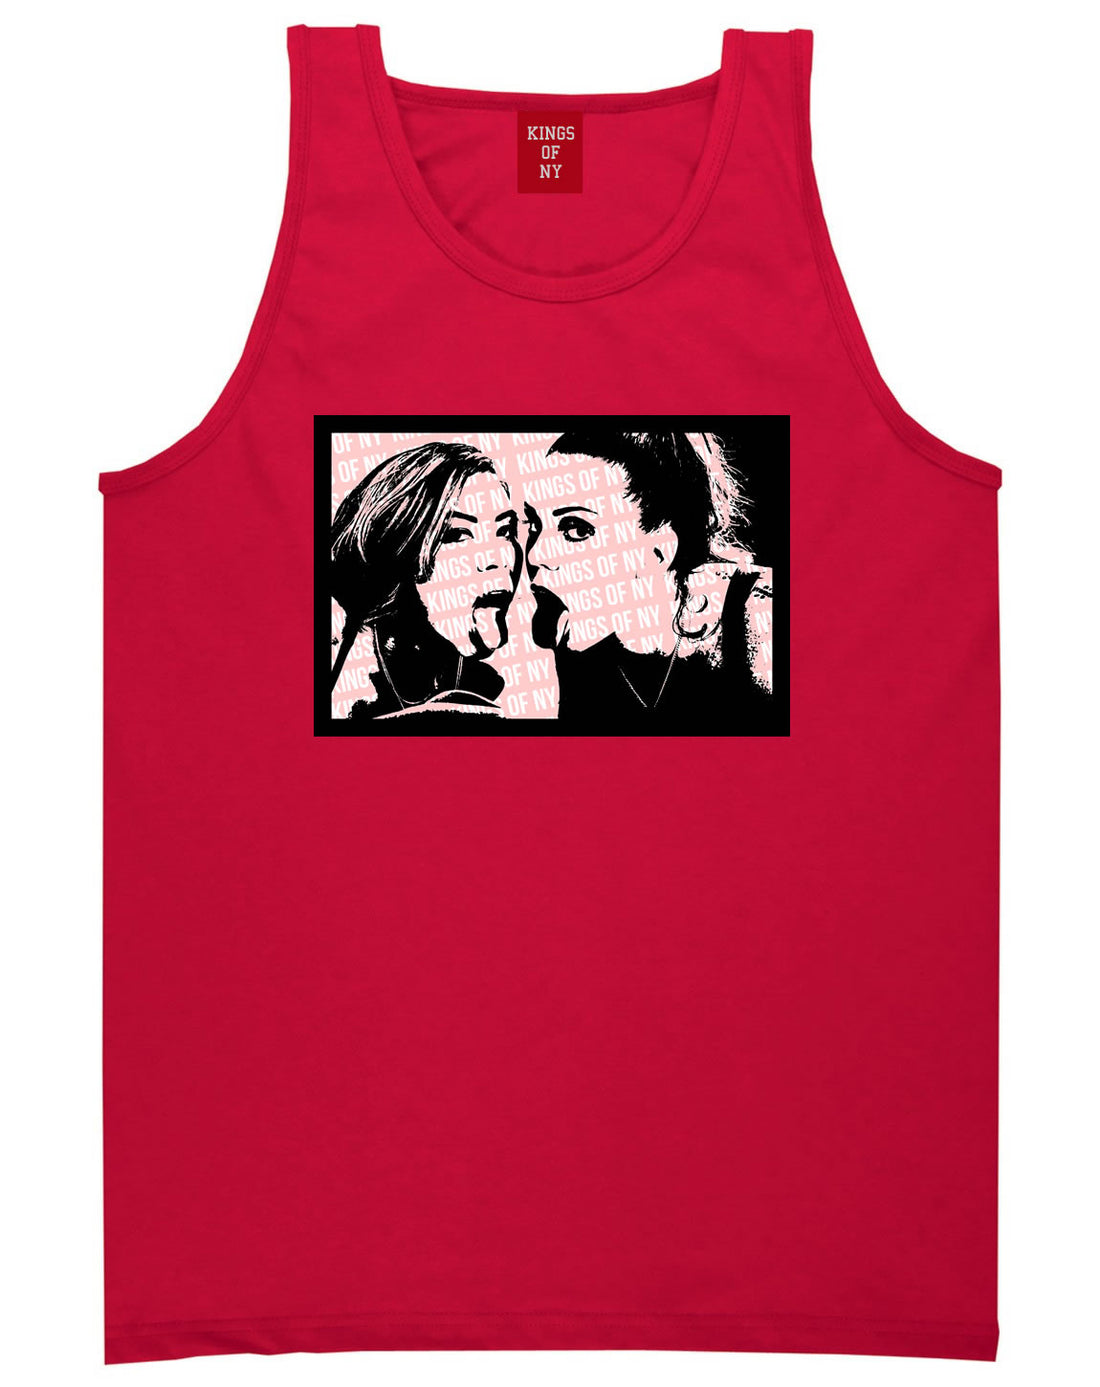 Double Up 2 Girls Tank Top